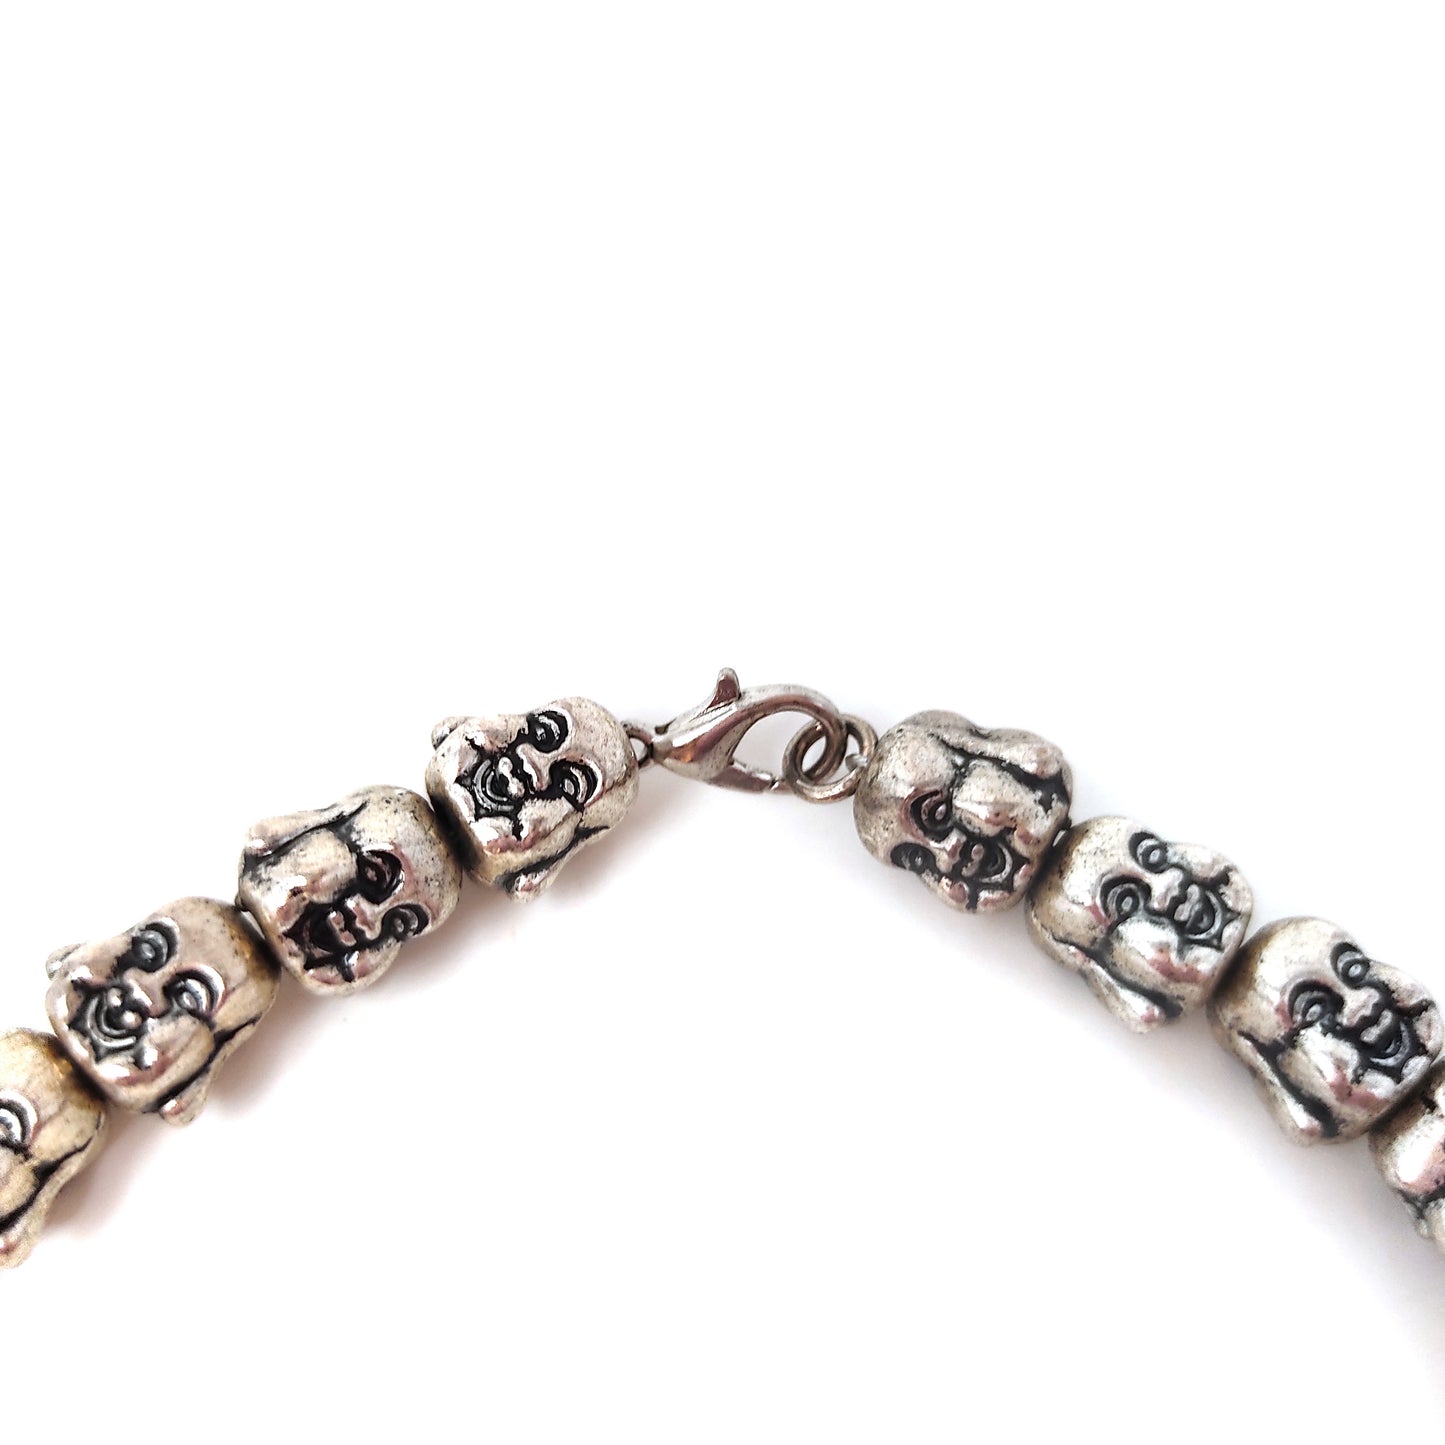 Tibetan Silver-tone Laughing Buddha Head Beads Necklace Buddhism 19.5" Necklace